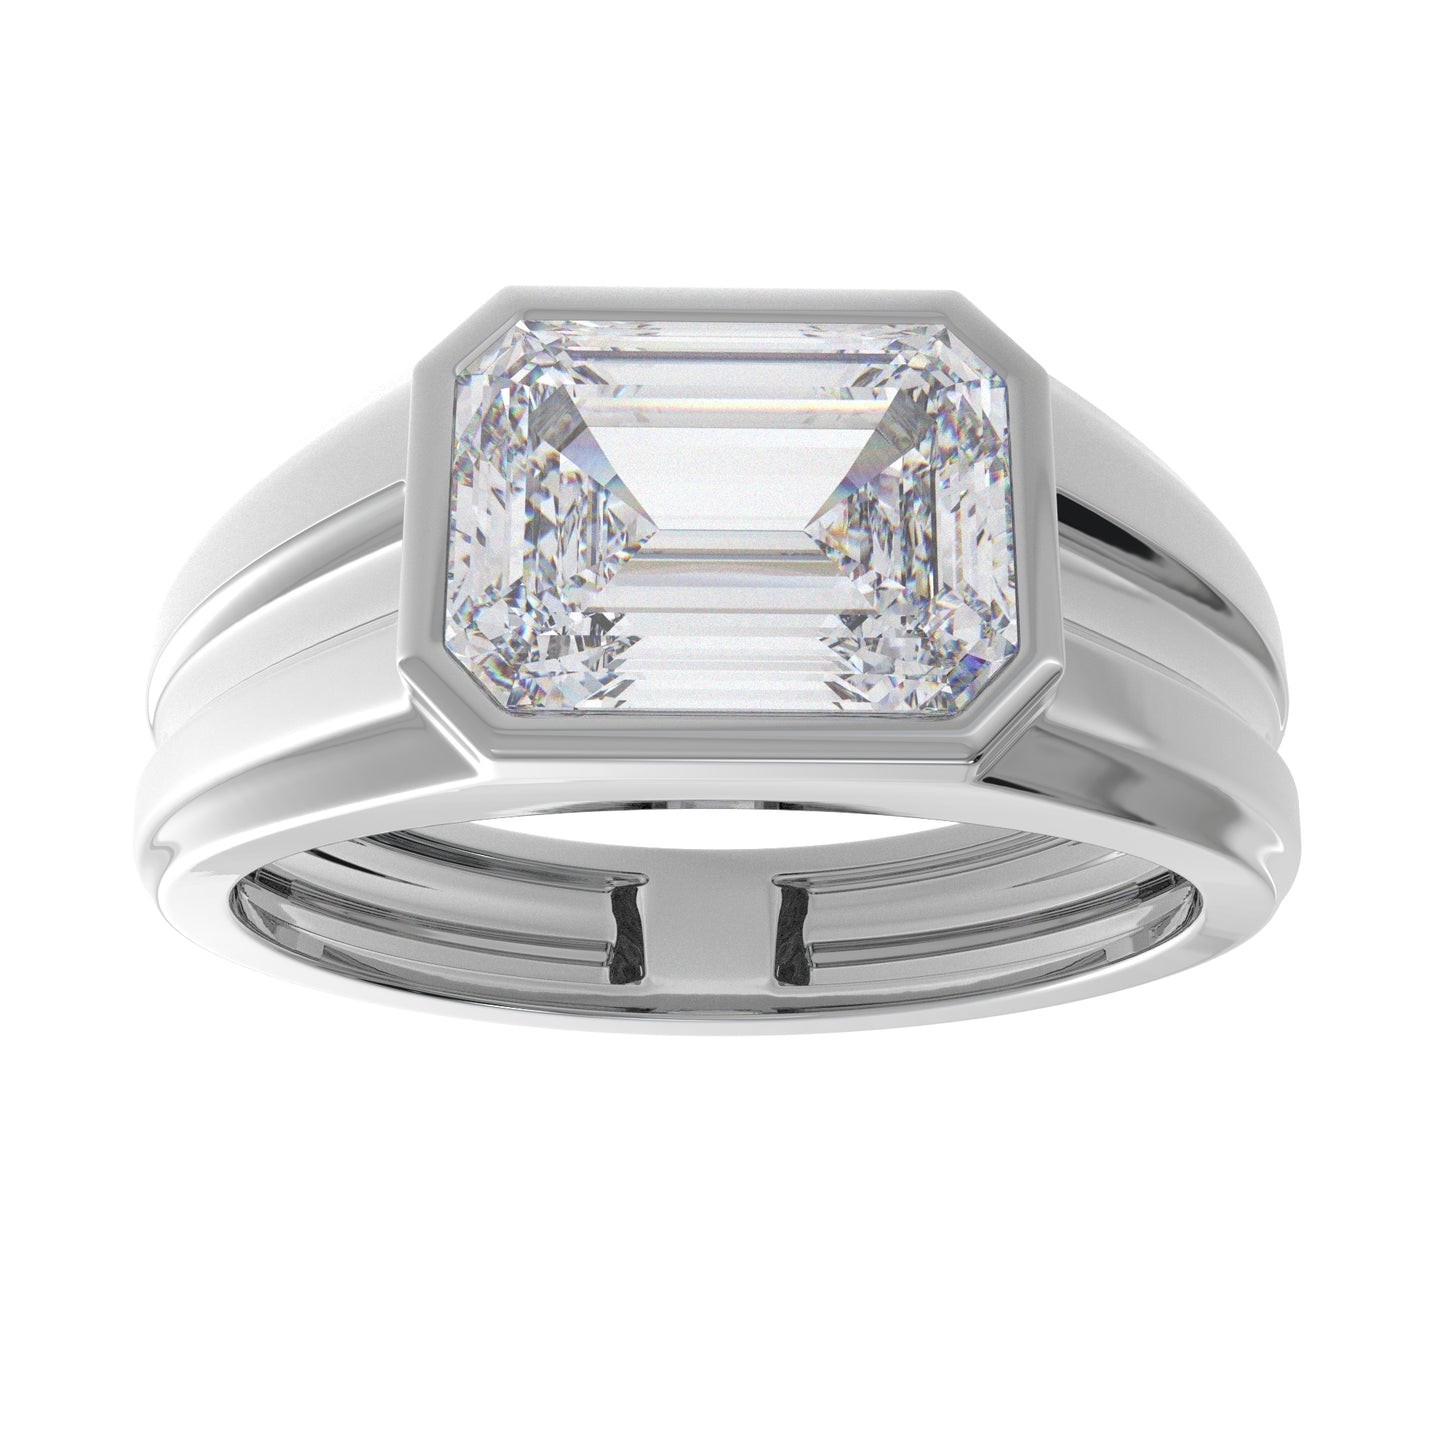 The Dhruv Ring